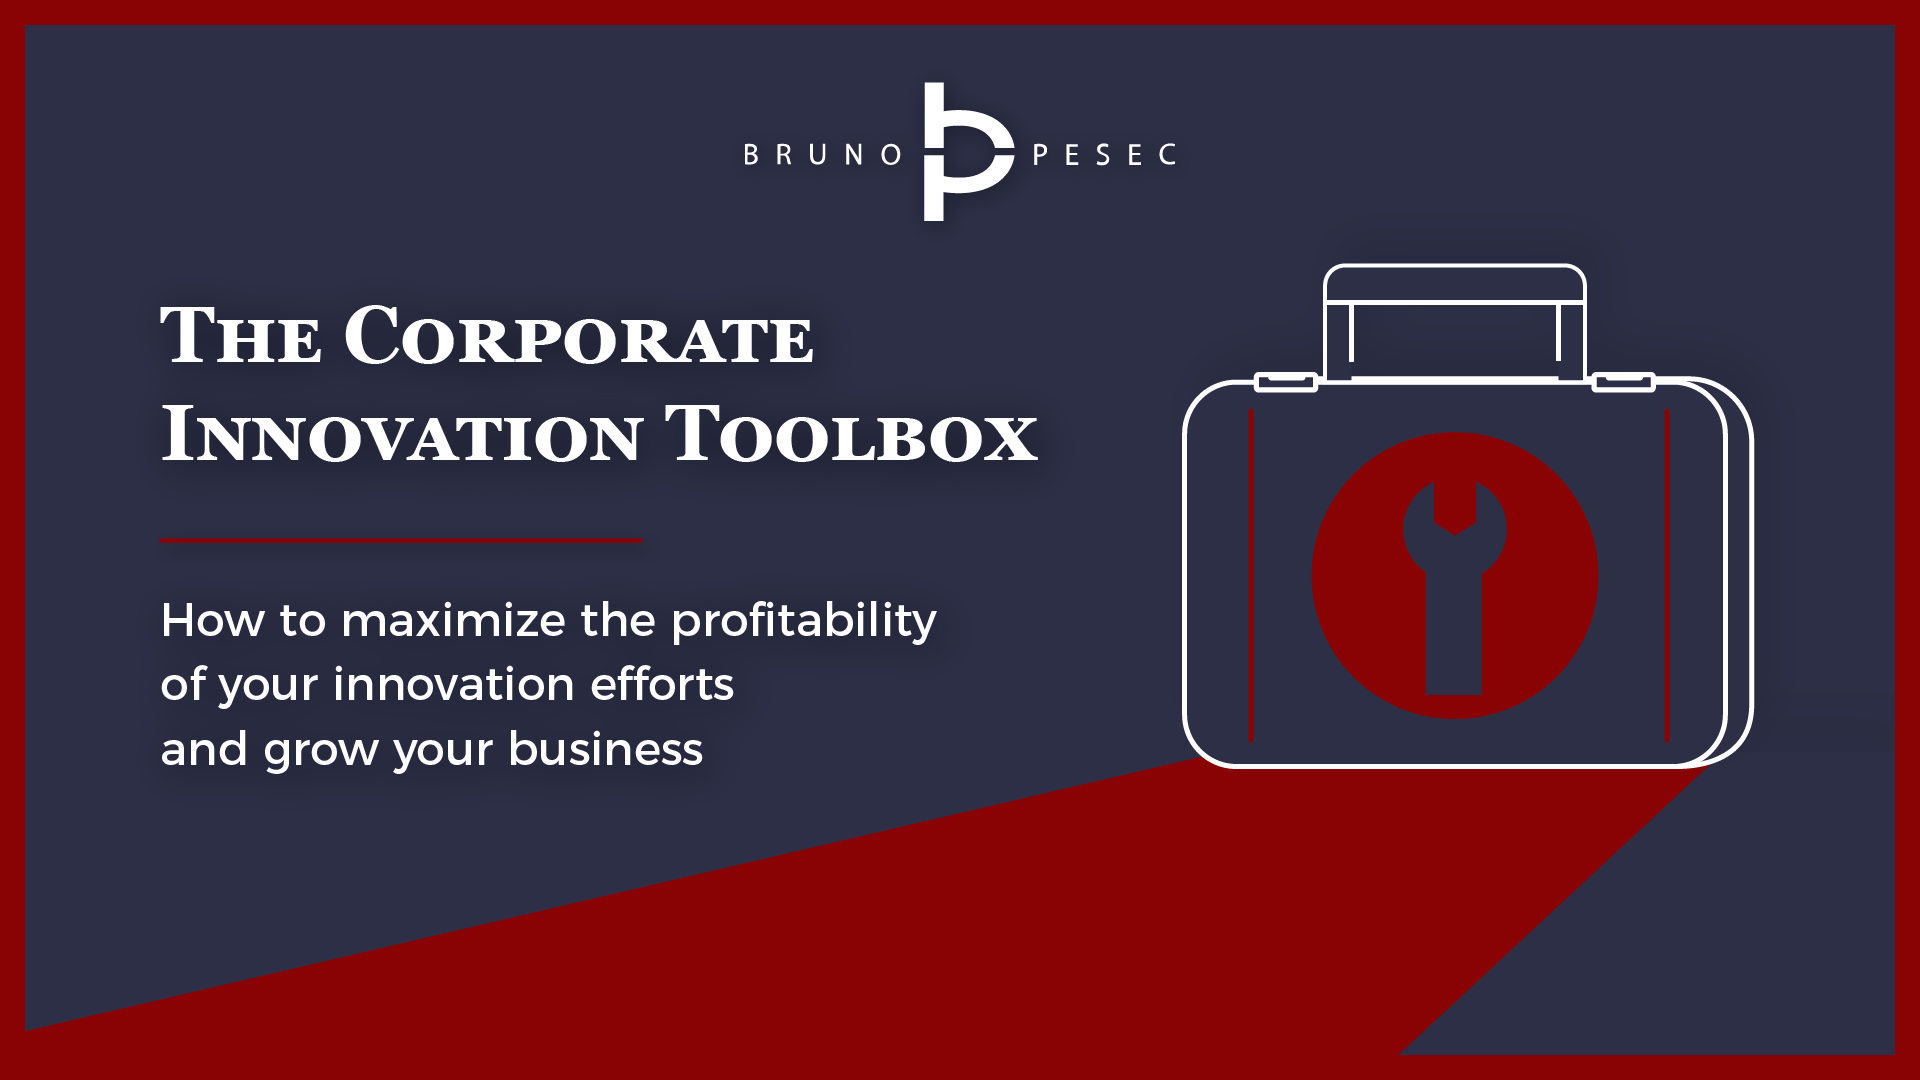  The Corporate Innovation Toolbox